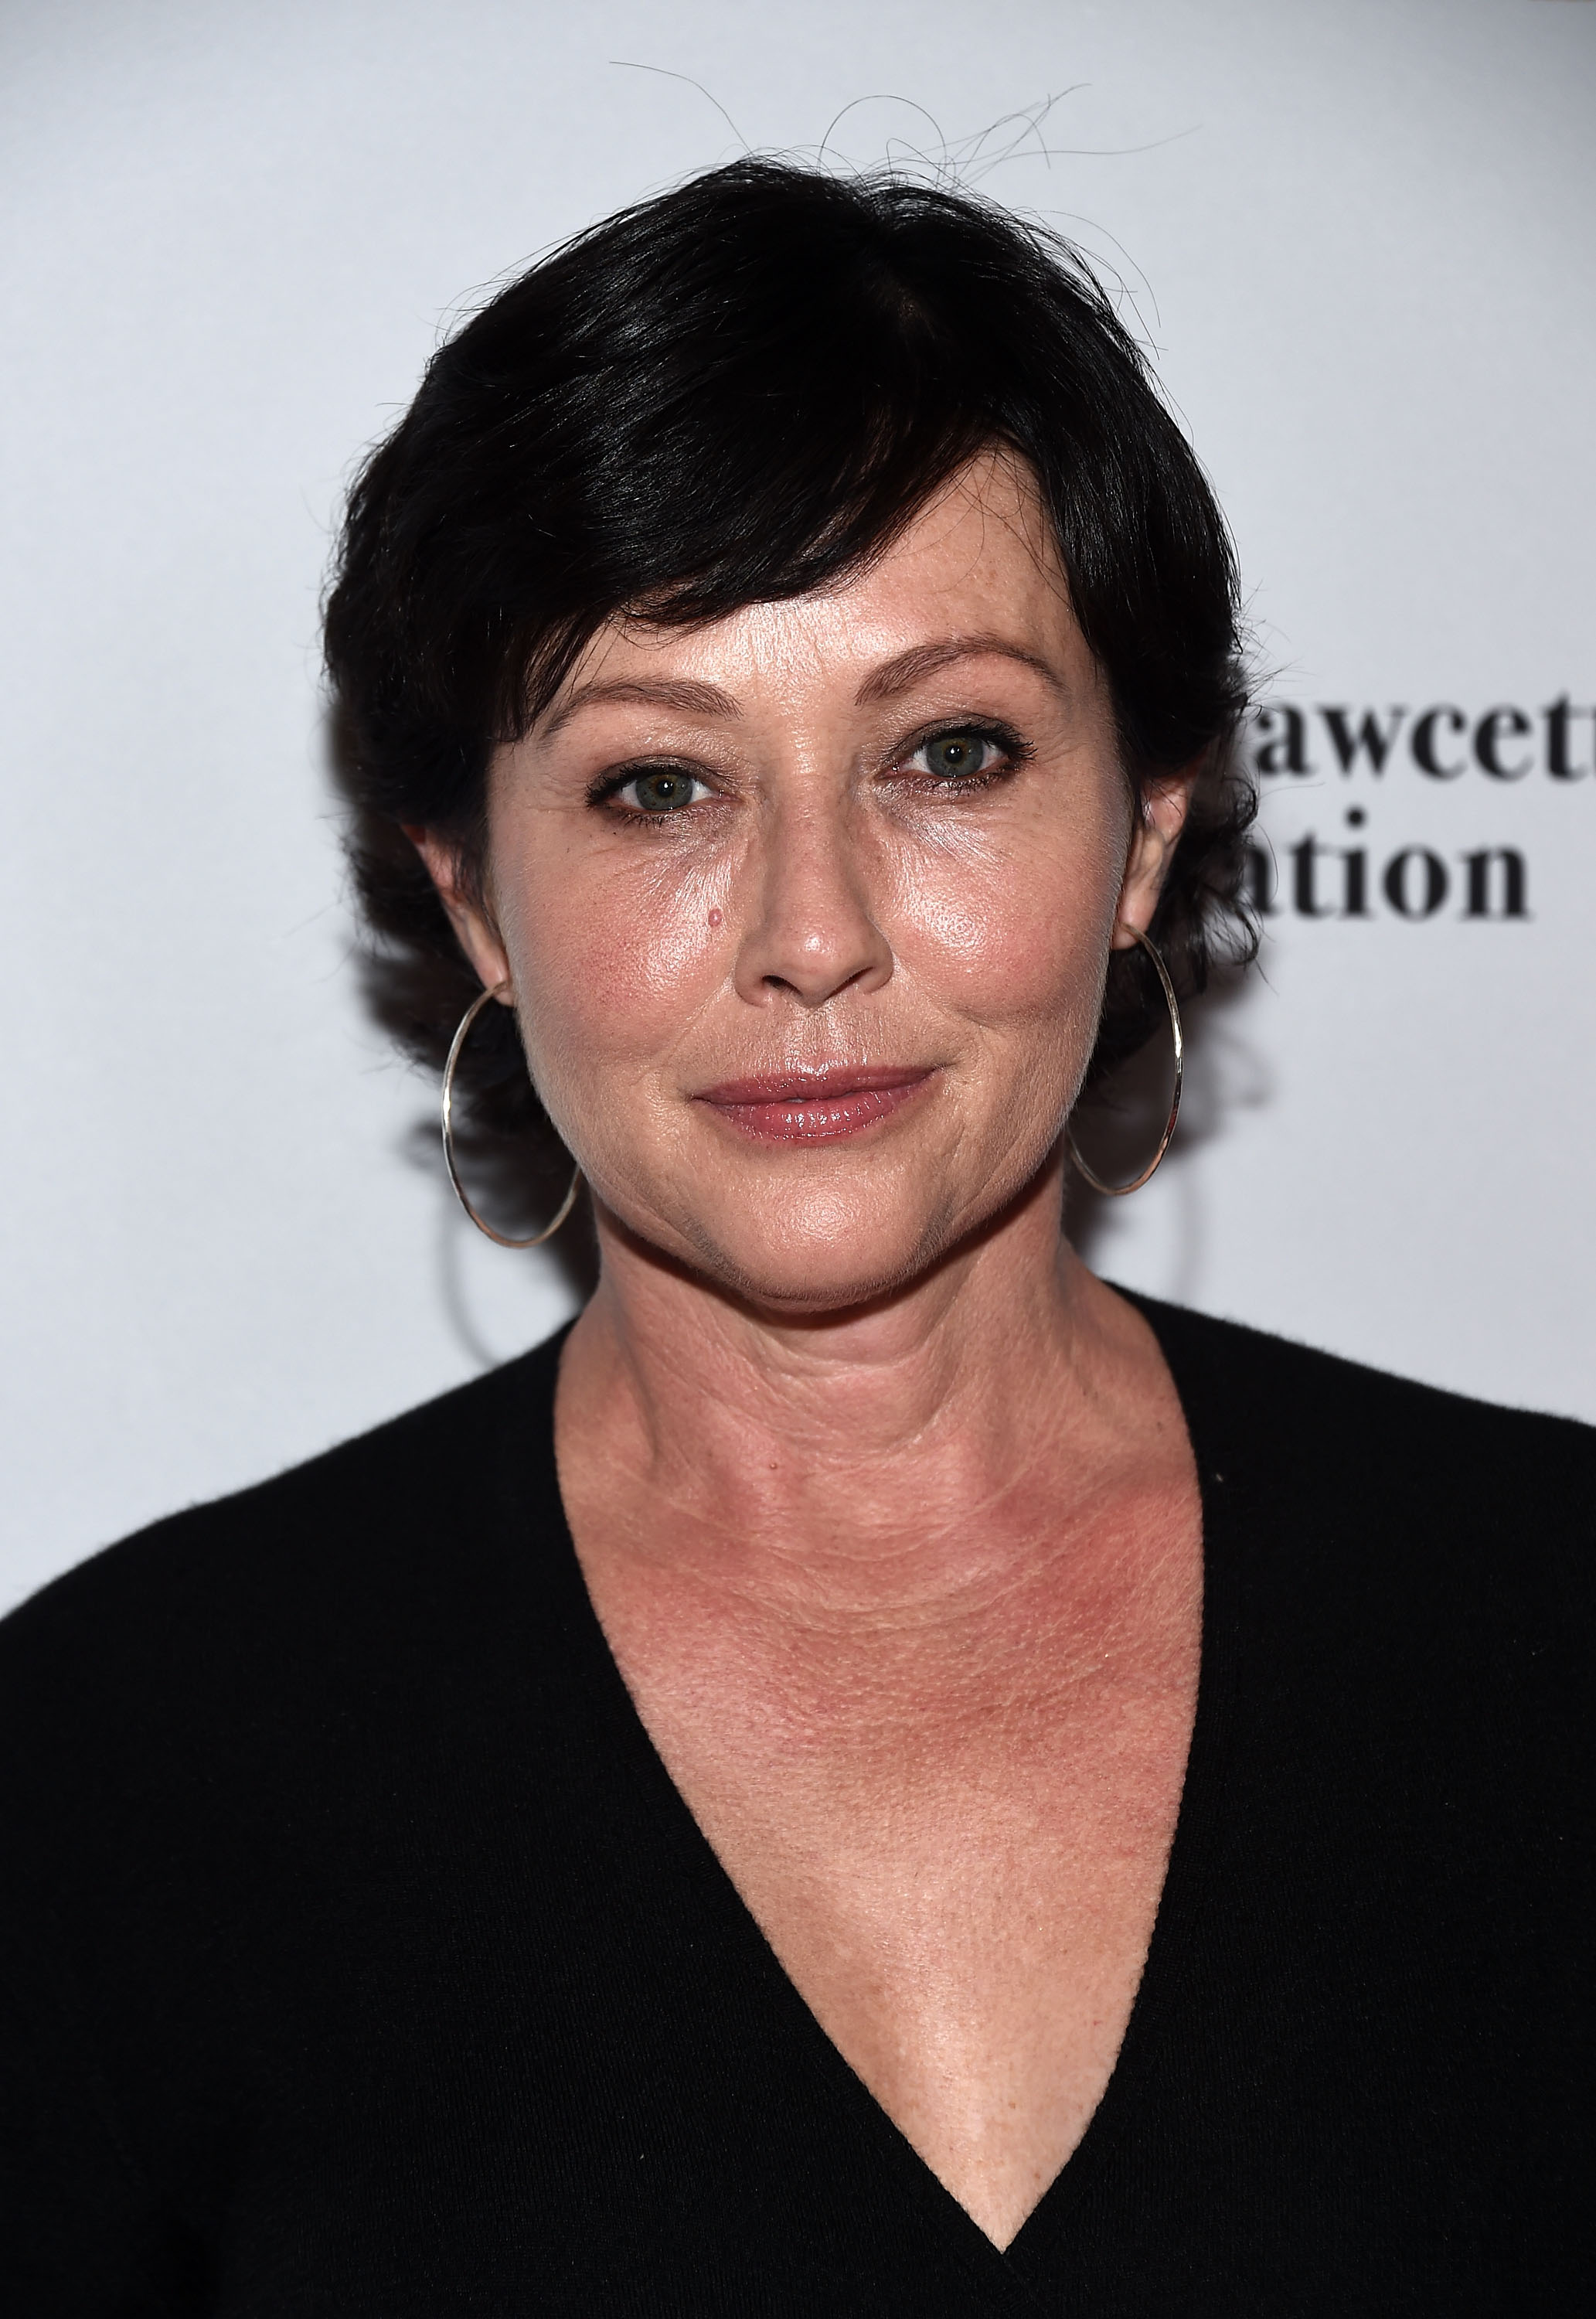 Shannen Doherty at the Farrah Fawcett Foundation's event honoring Stand Up To Cancer on September 9, 2017 in Beverly Hills, California | Source: Getty Images